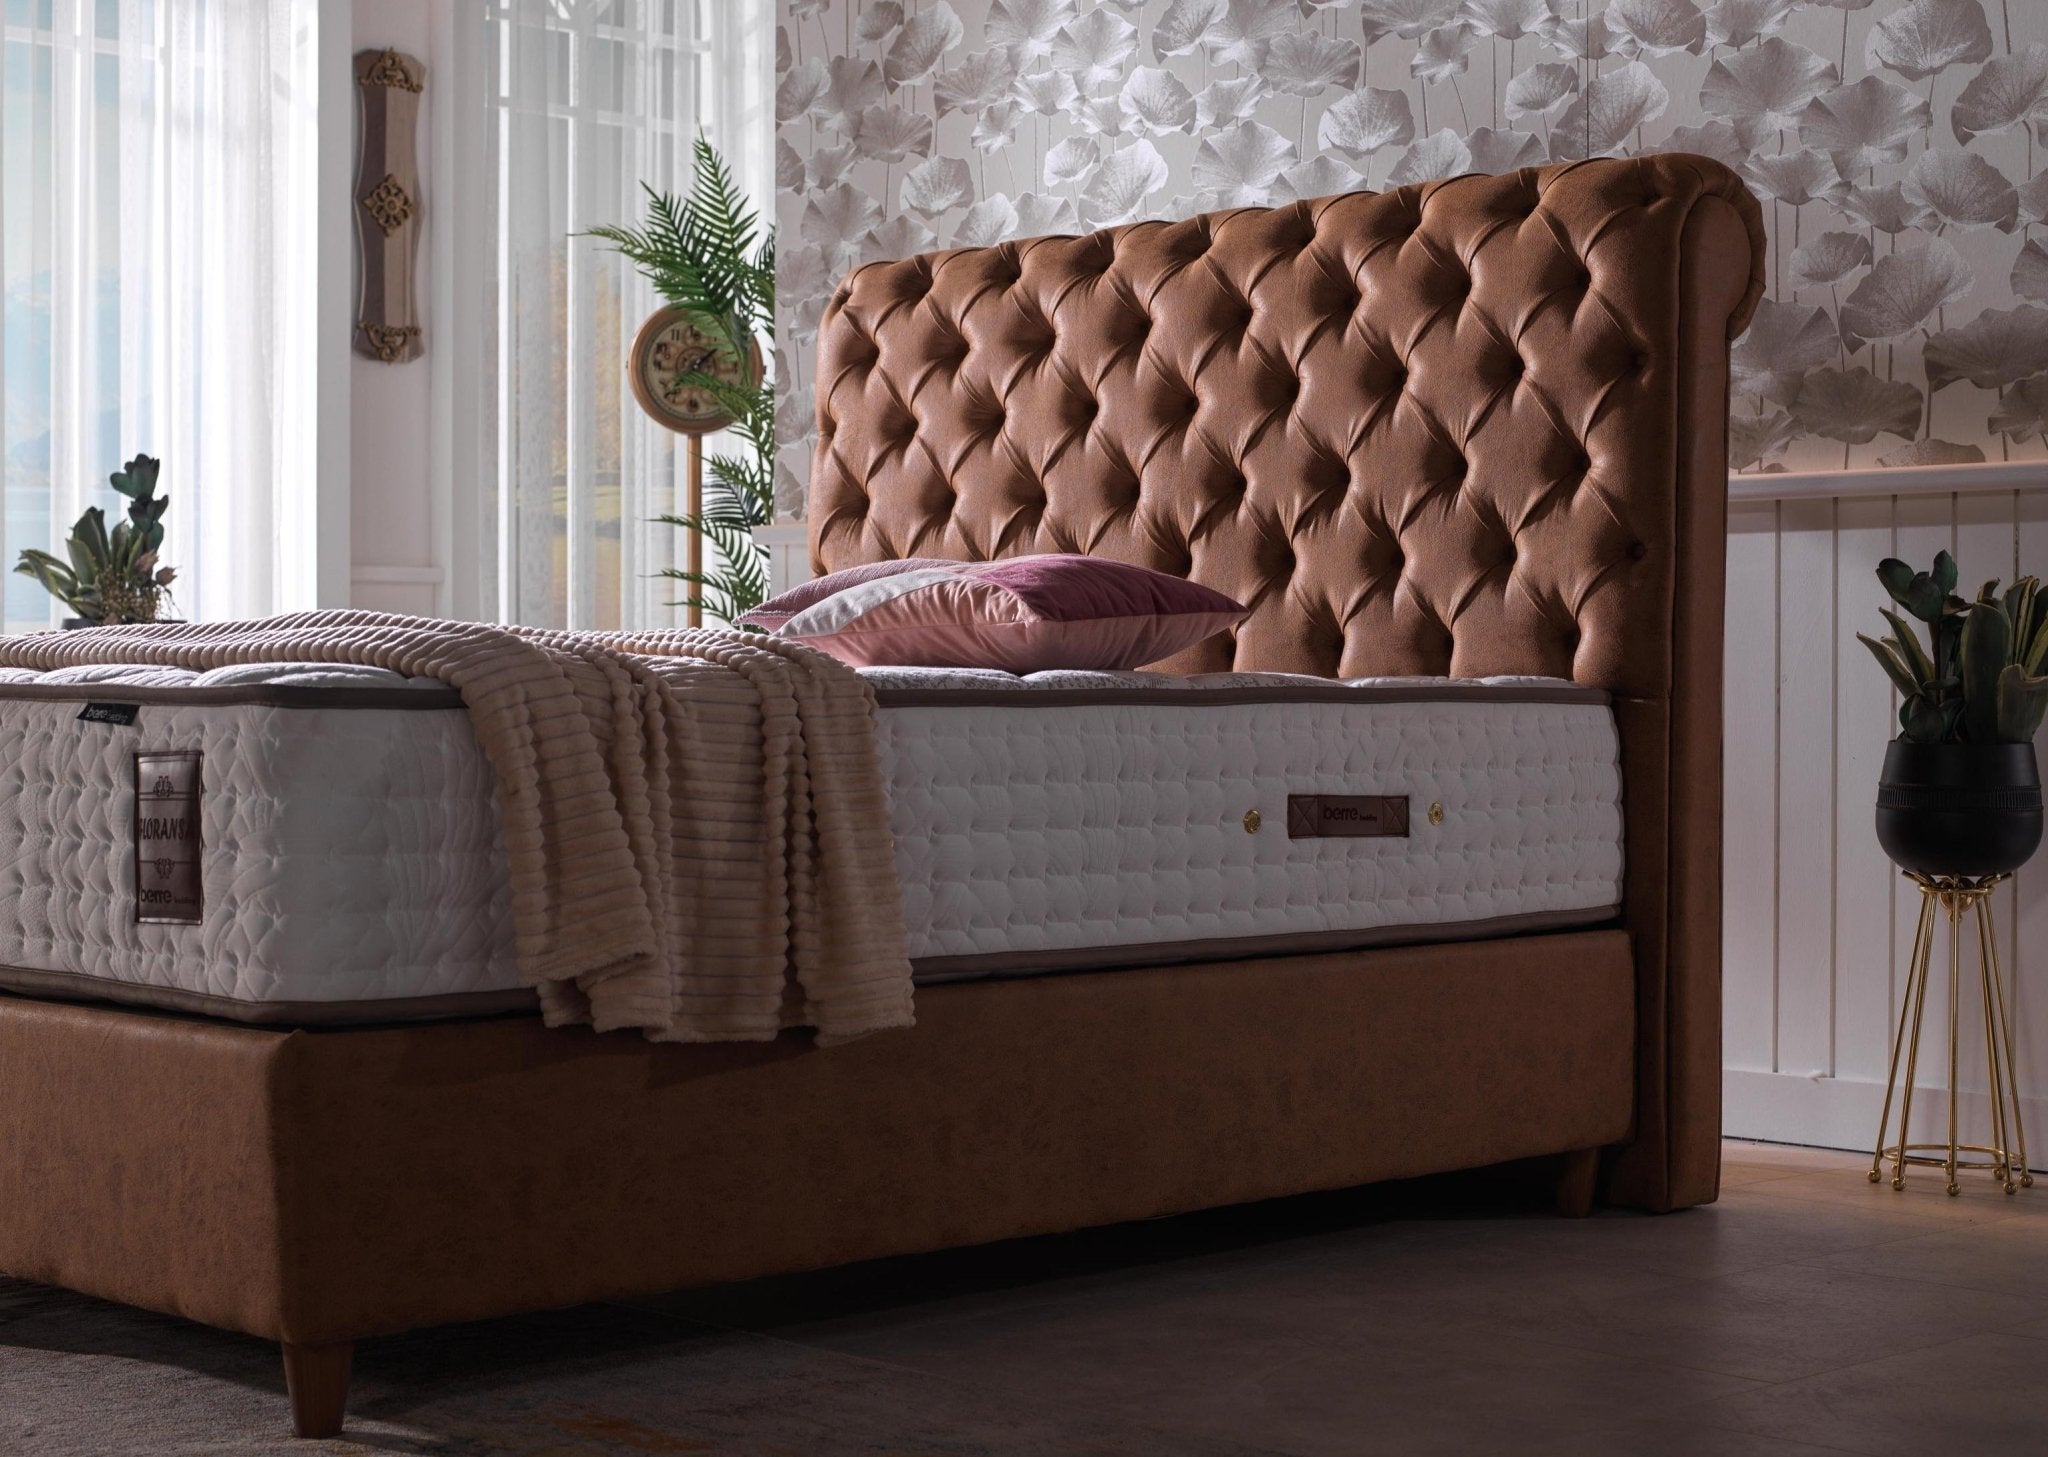 FLORANCE Bed TWIN XL Brown